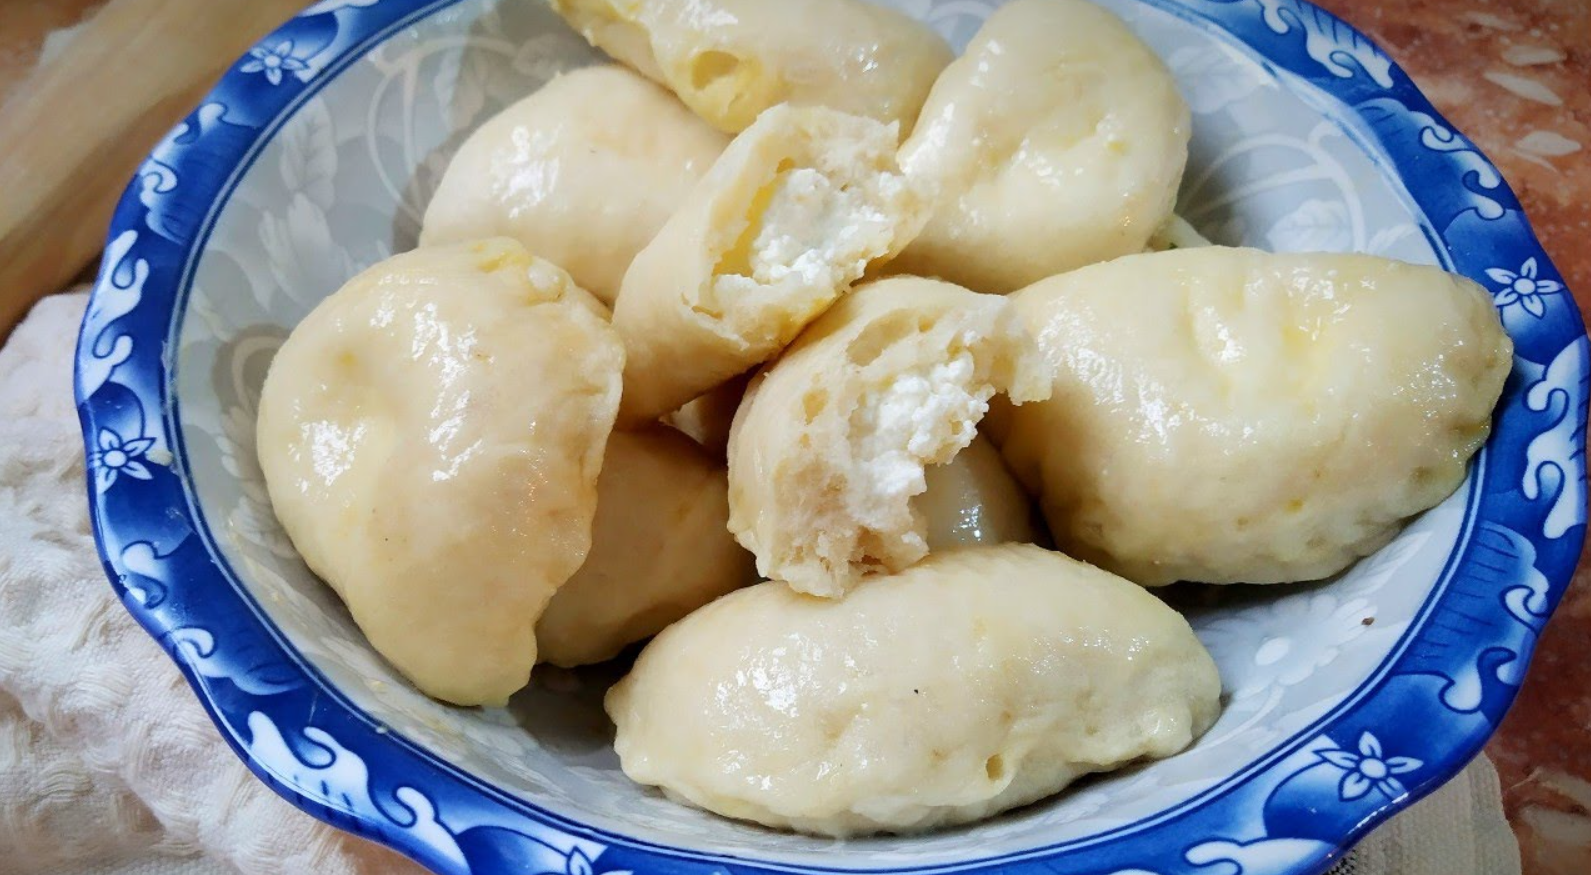 Poltava-style varenyky: how to prepare the perfect dough for the dish